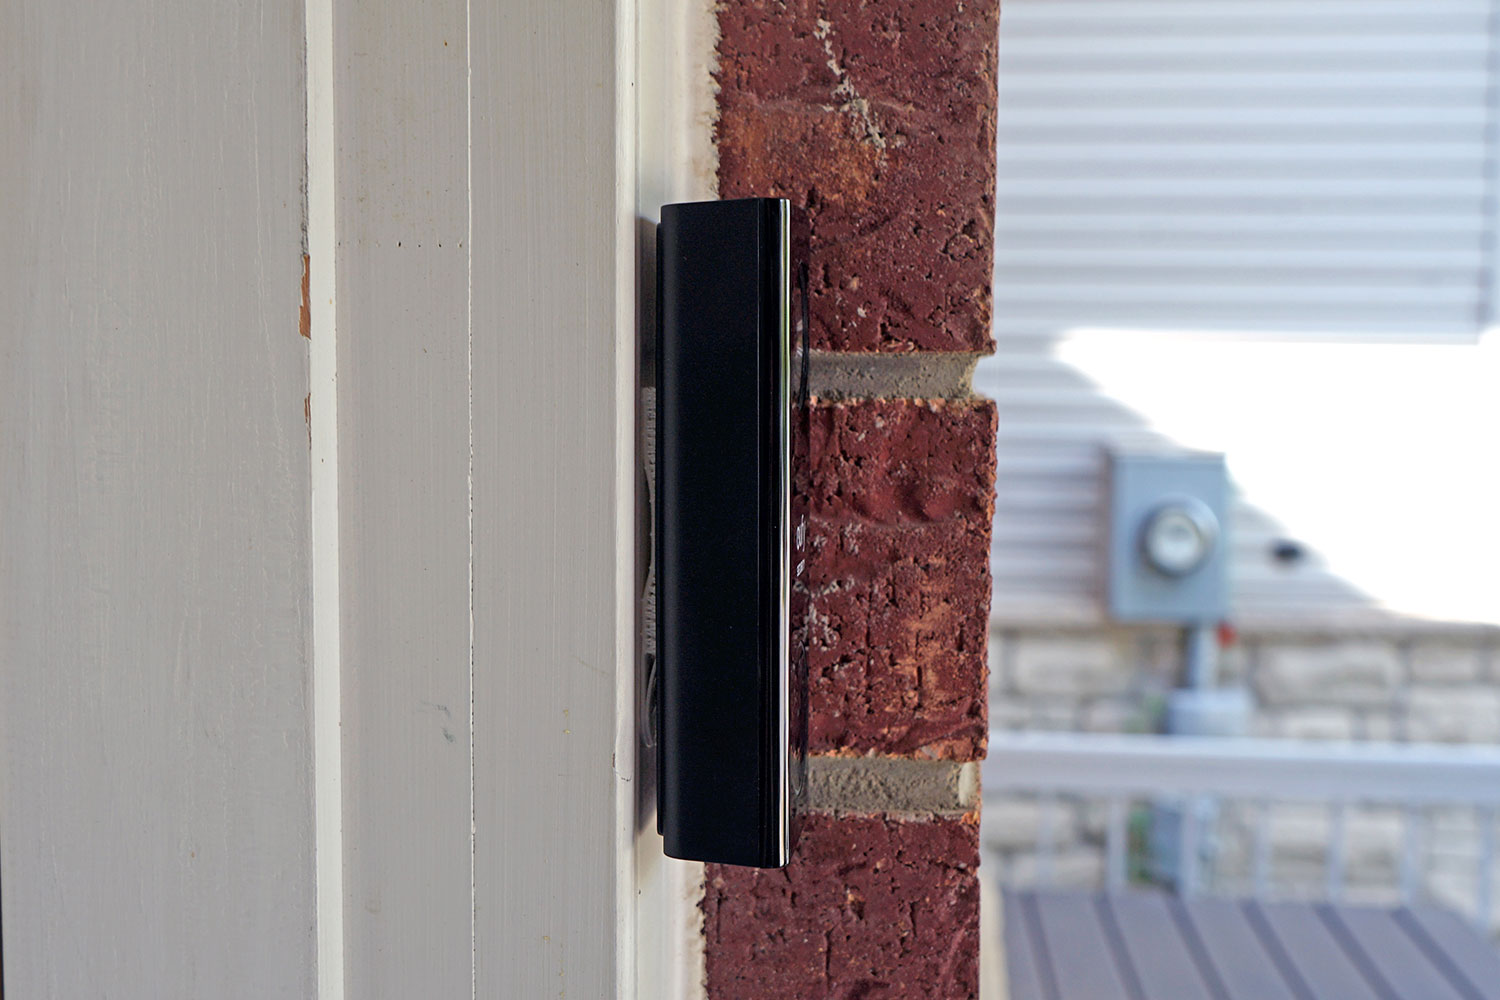 Eufy Video Doorbell (model T8200) review: Make sure you know what this  inexpensive Ring competitor can't do